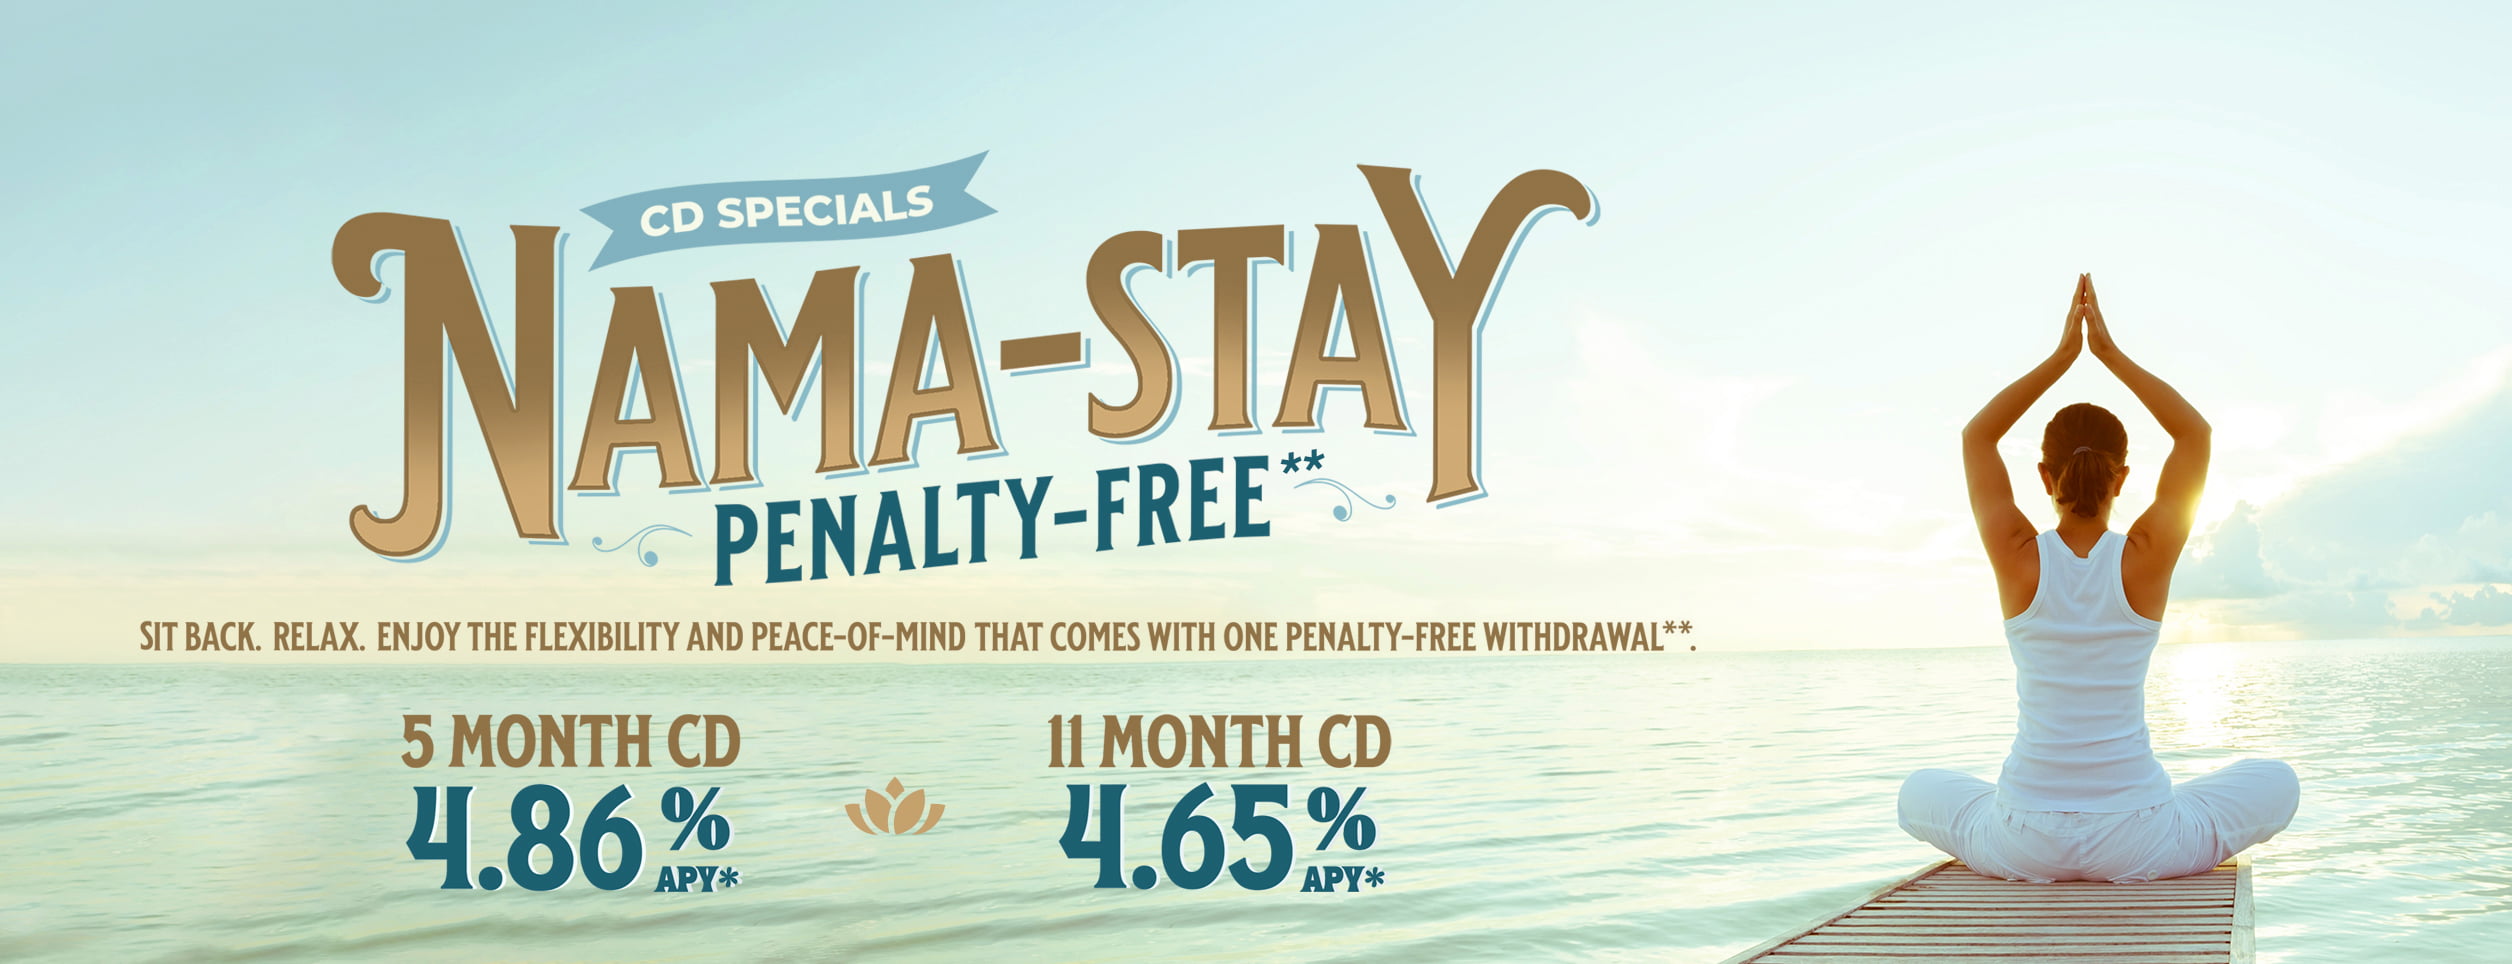 Nama-Stay Penalty Free 5 Month CD 4.86% APY, 11 Month CD 4.65% APY